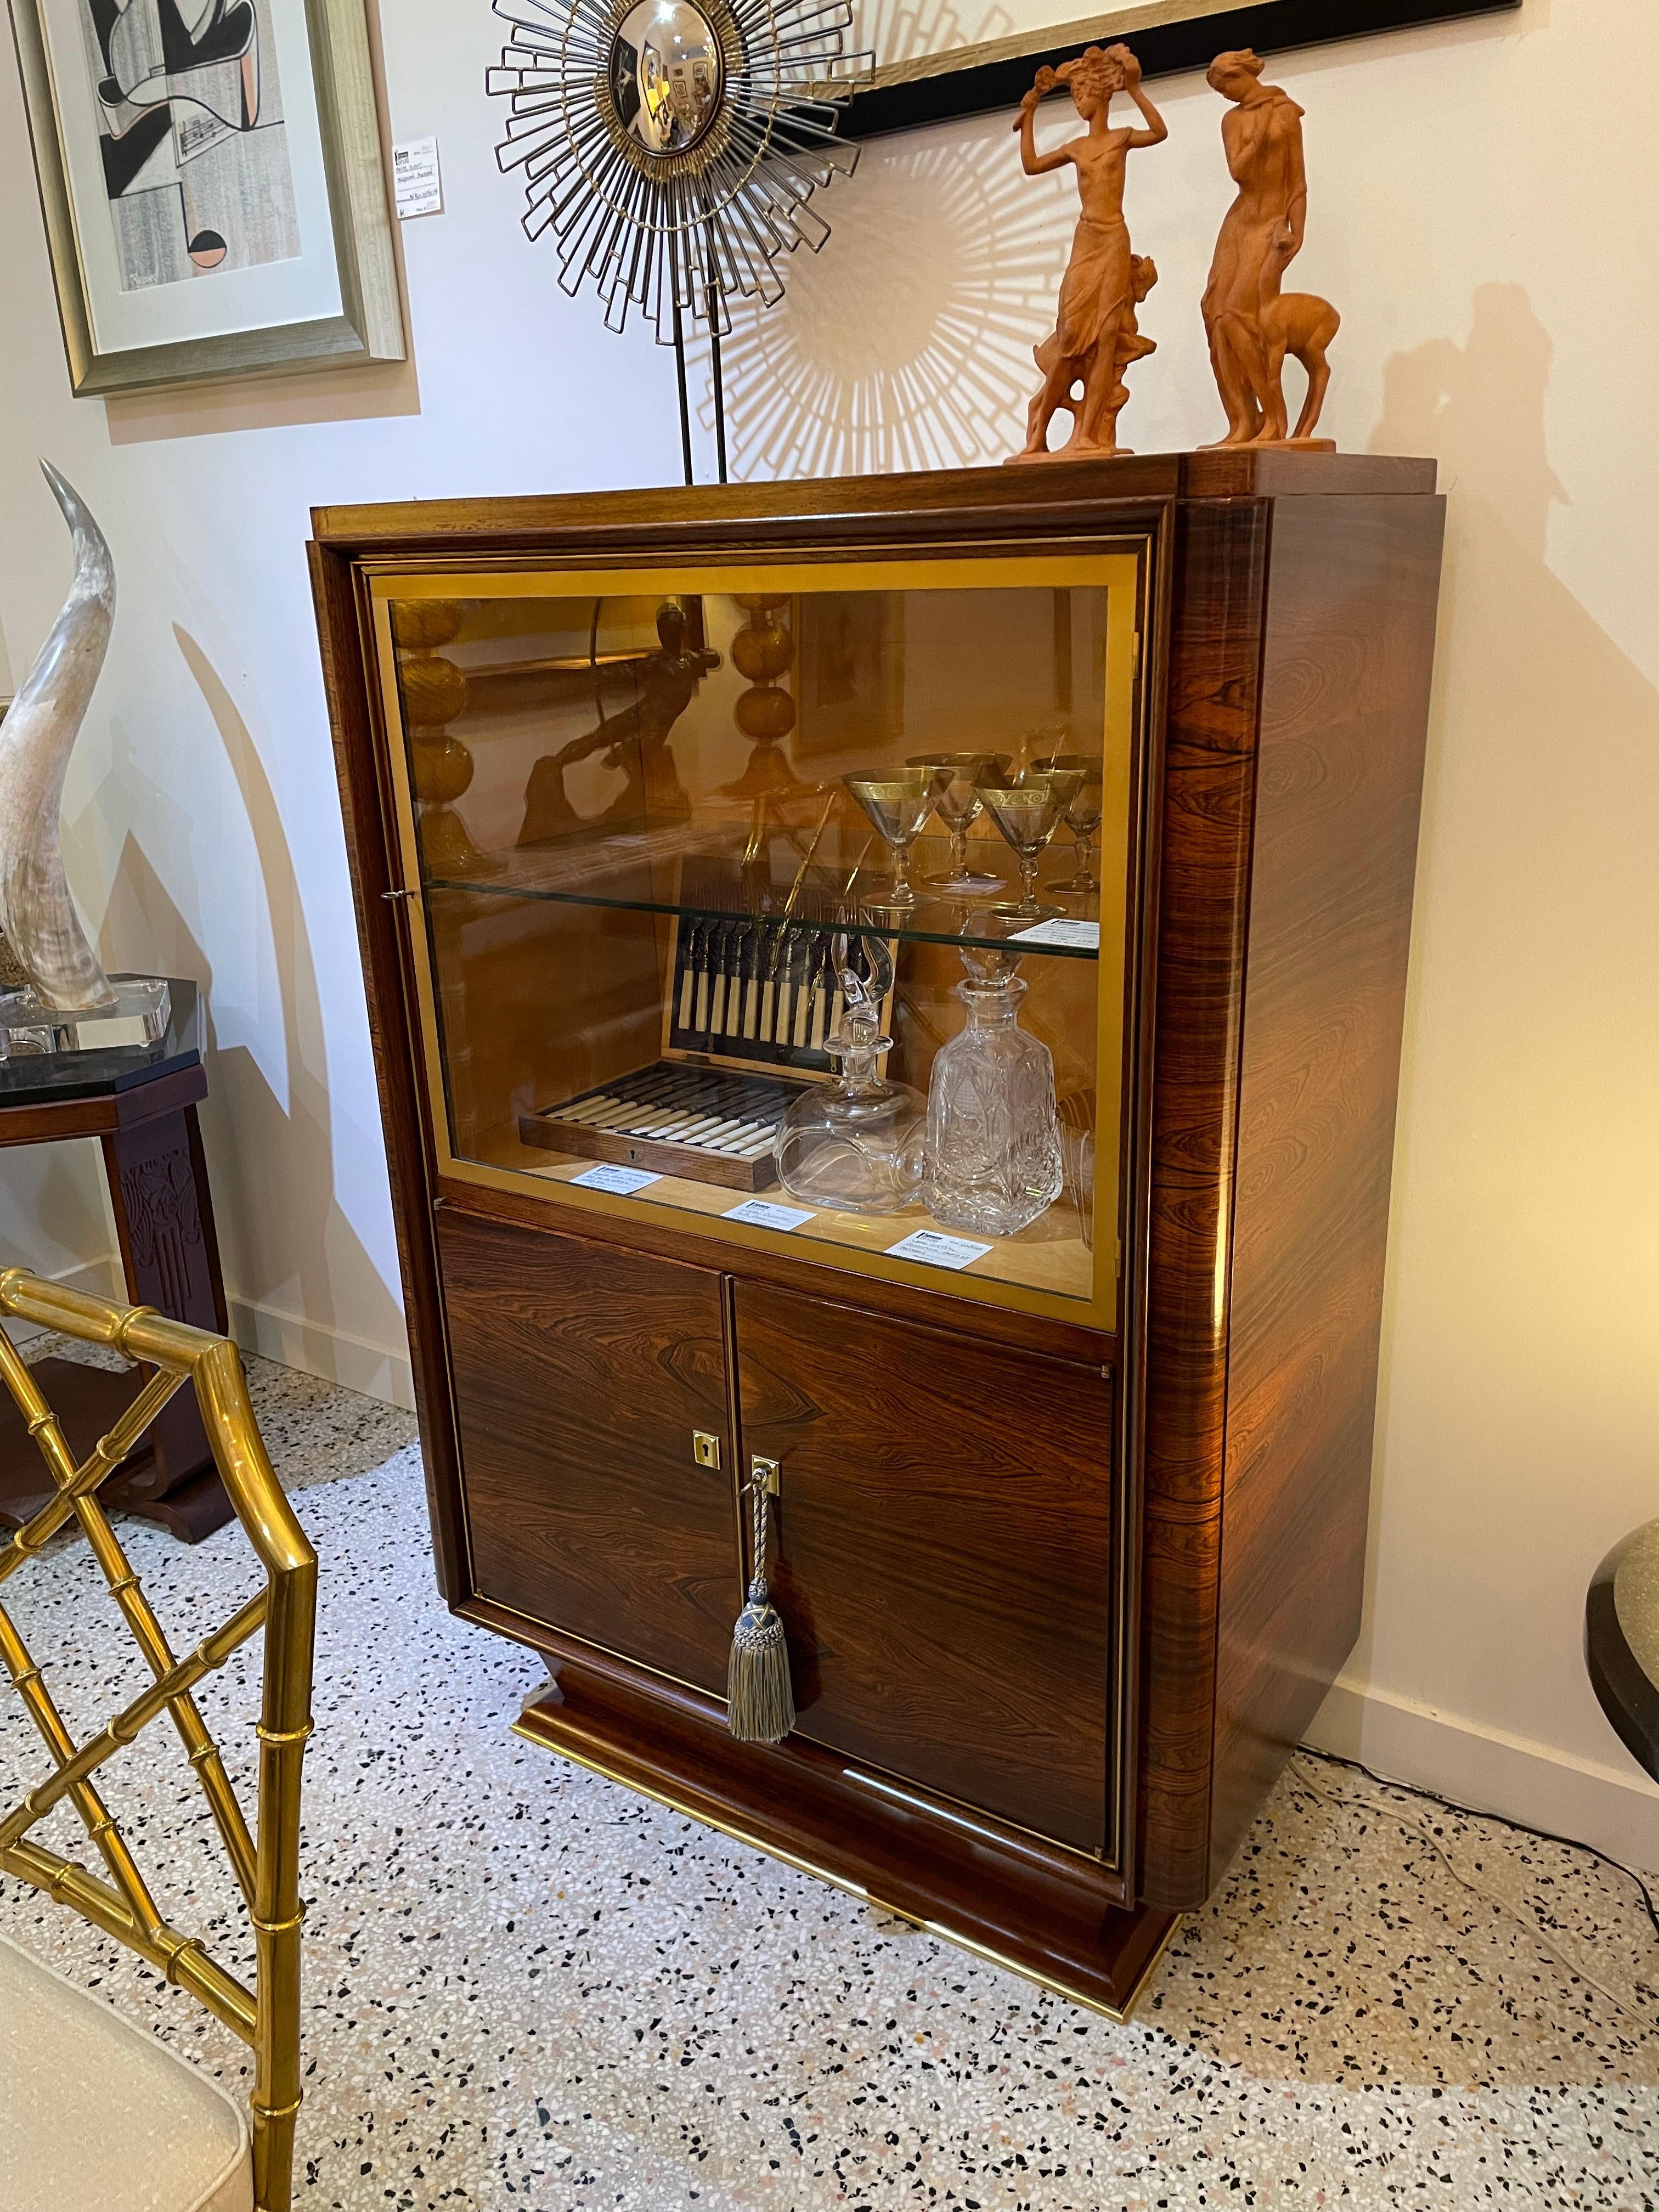 This stylish and chic French art deco cabinet dates to the 1930s-1940s and is very much in the style of pieces created by Christian Krass. The piece is fabricated in rosewood, glass and bronze and has been professionally restored. 

Note: The large